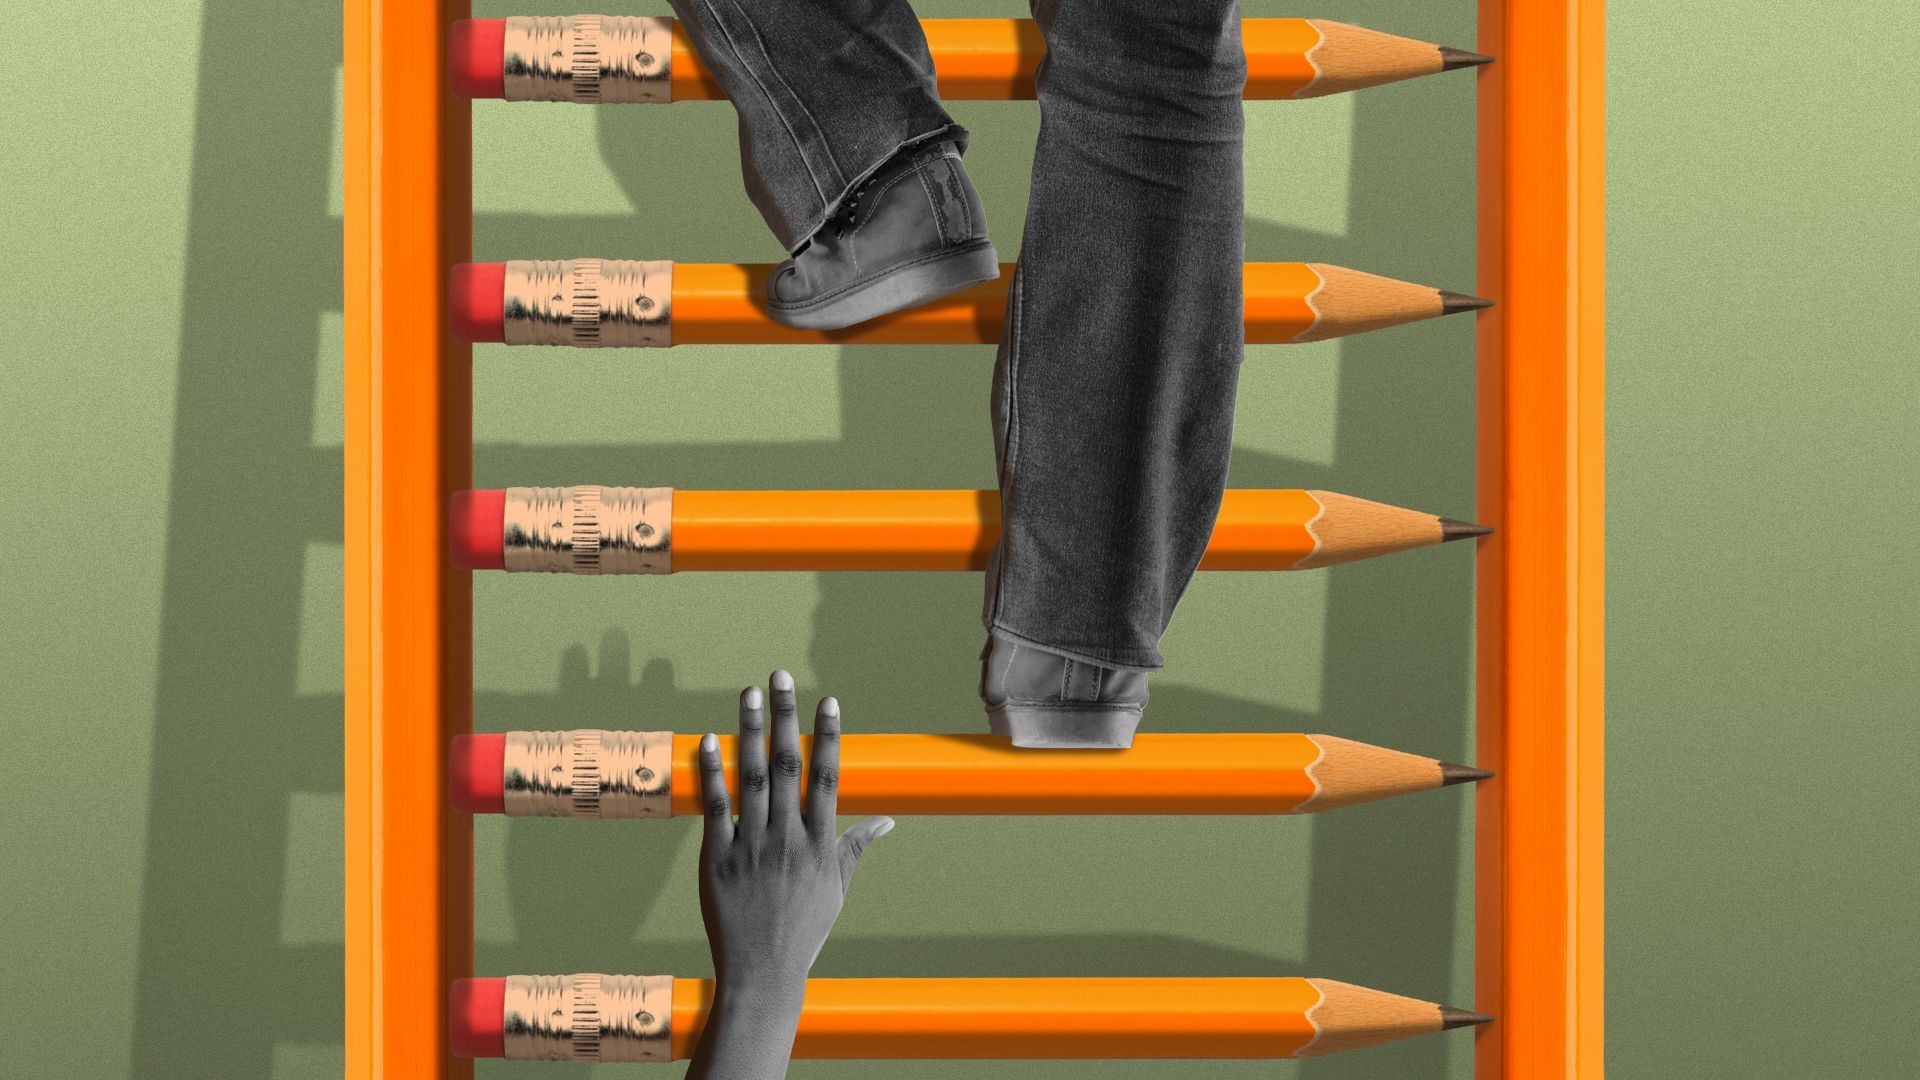 Illustration of people climbing up a ladder made of pencils